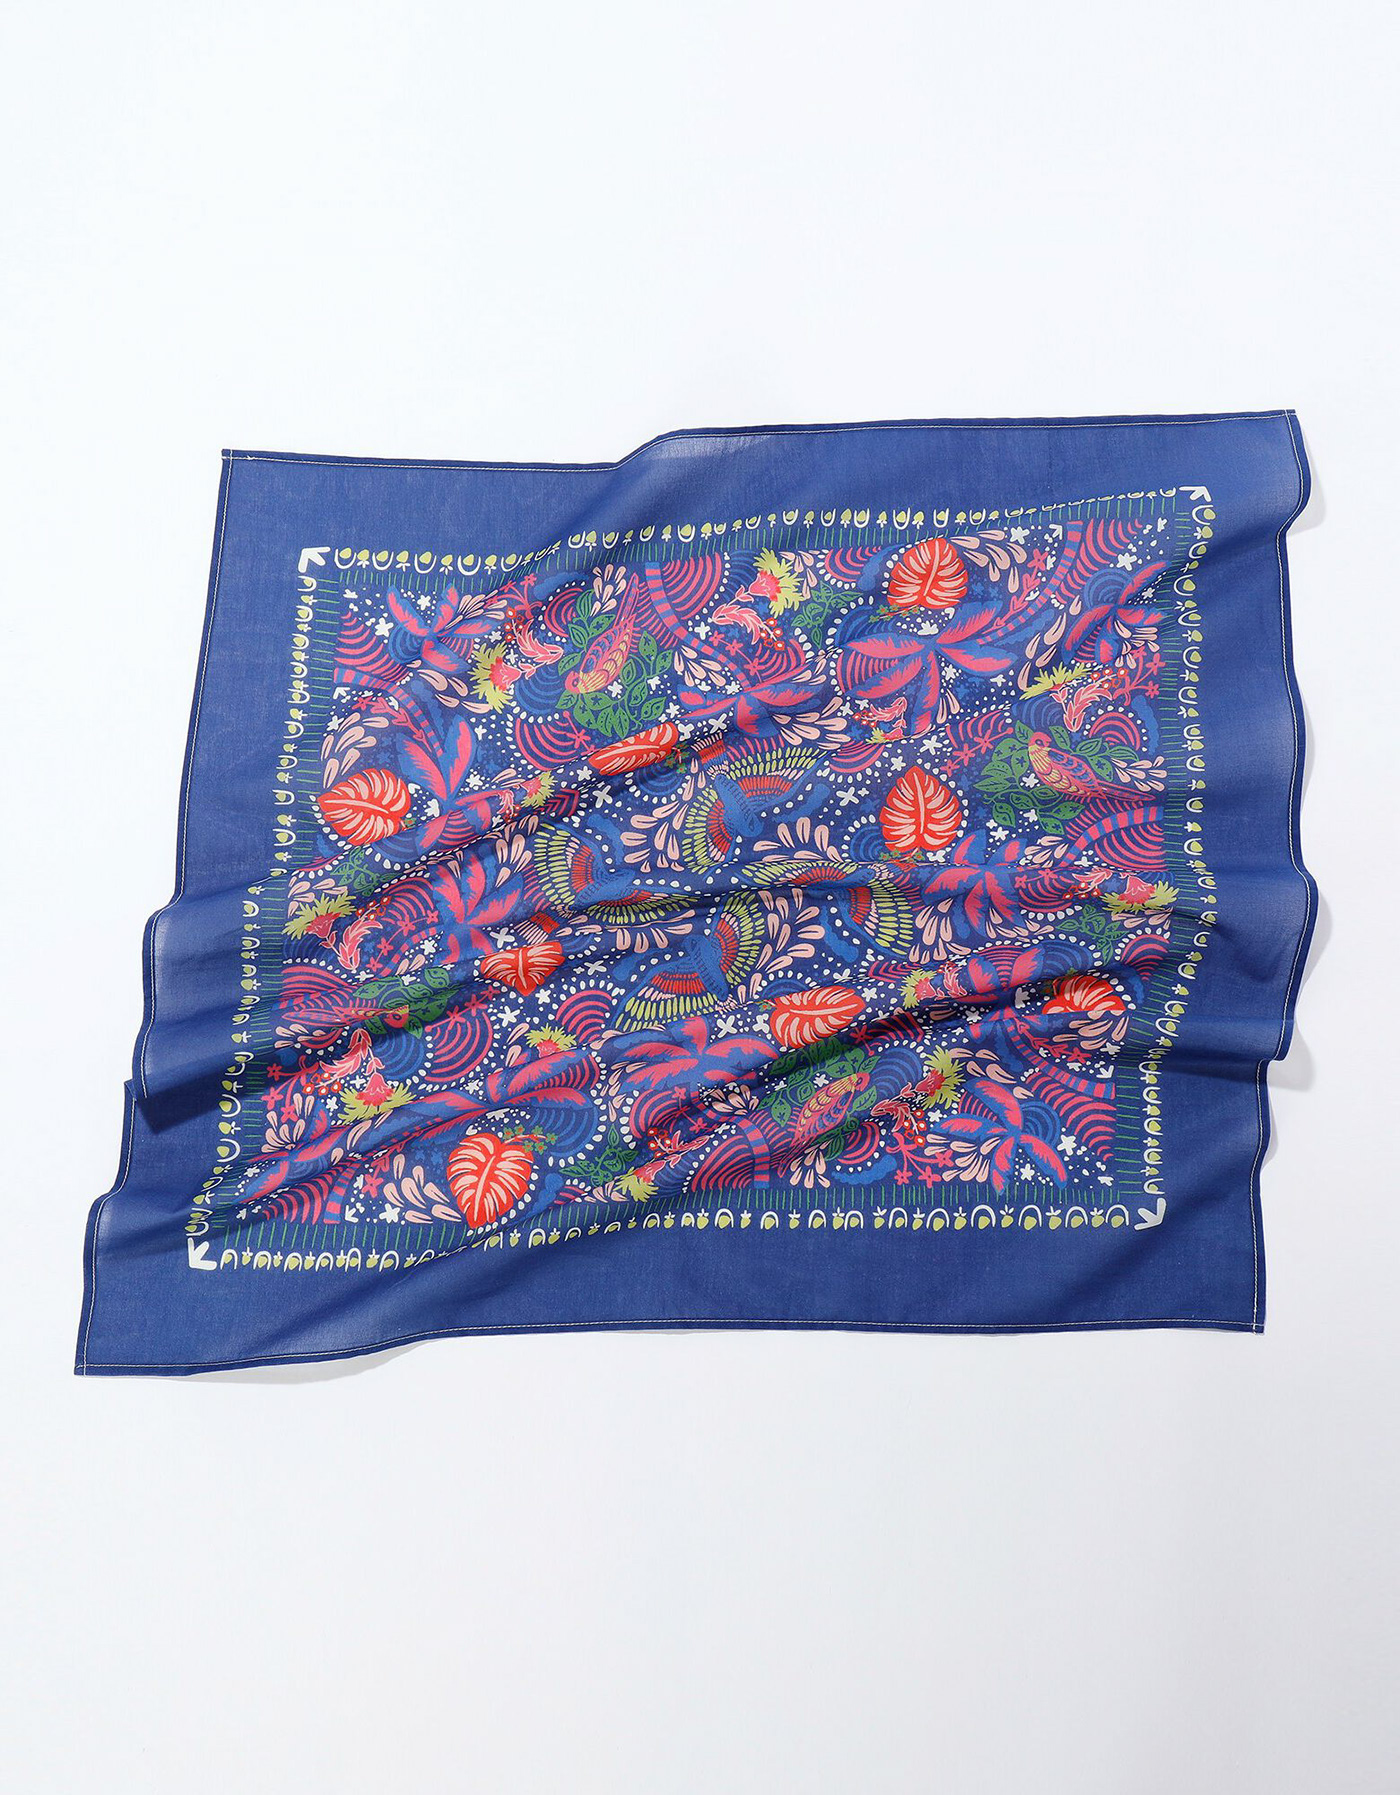 fashion accessory scarf design scarf Surface Pattern colorful artwork textile